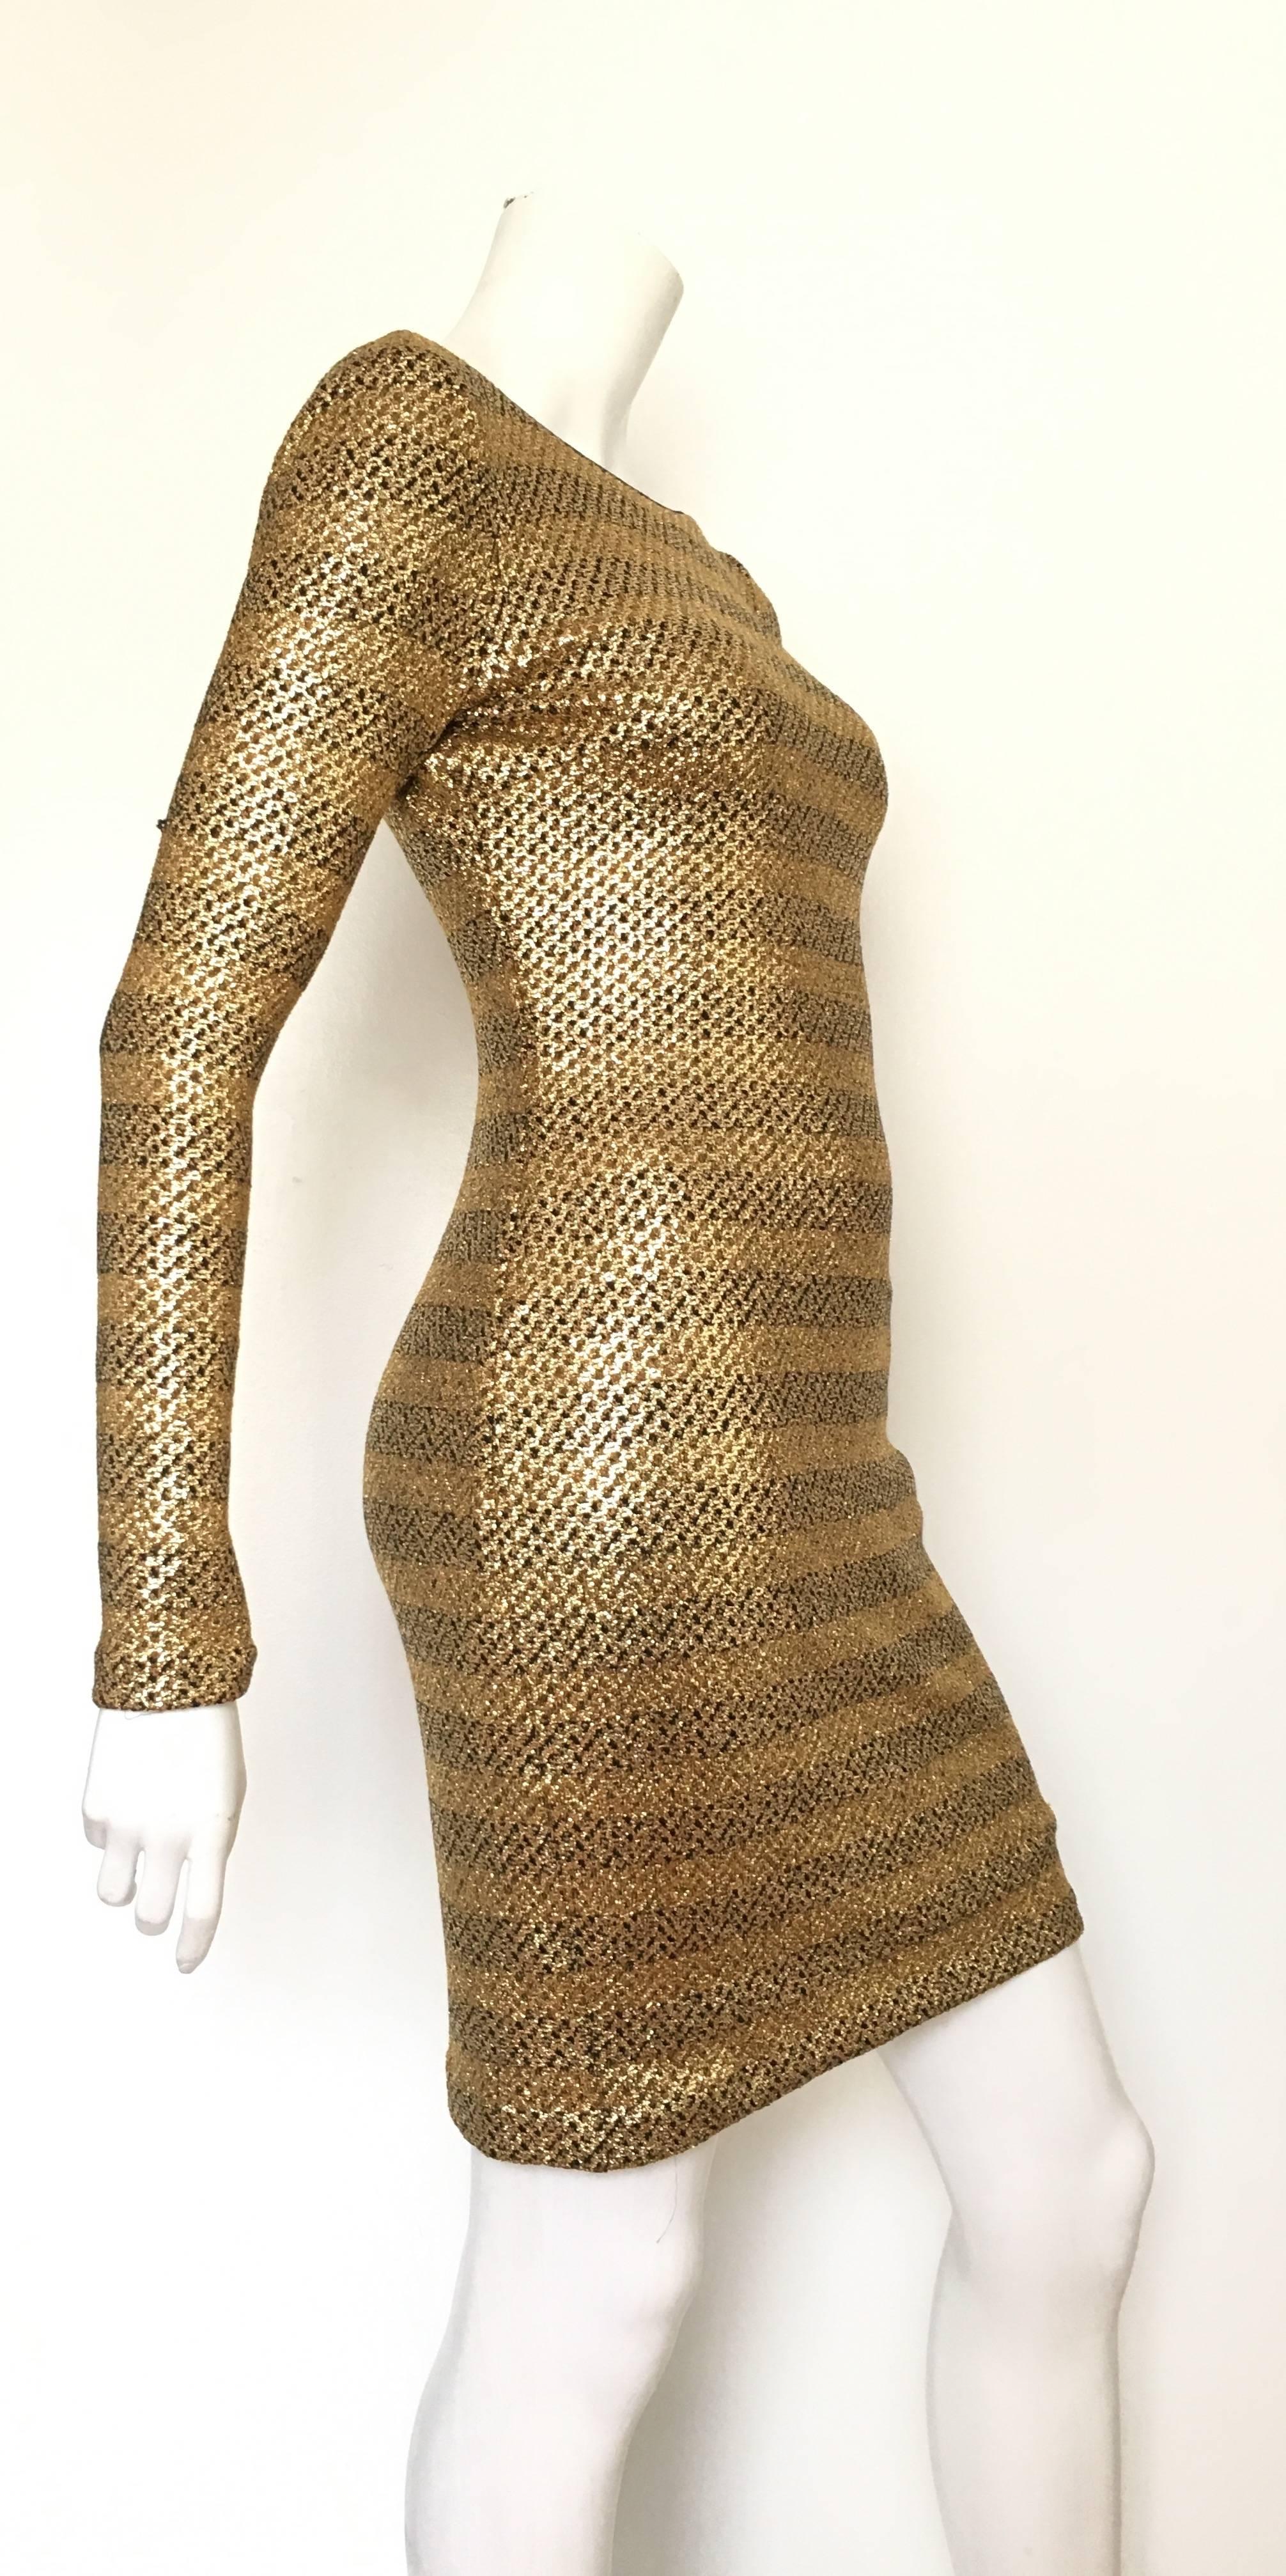 Badgley Mischka super sexy gold metallic stretch cocktail dress is an USA size 2 but also a size 4.  Matilda the Mannequin is a true size 4 and this dress fits her beautifully. Ladies please grab your trusted tape measure so you can measure your